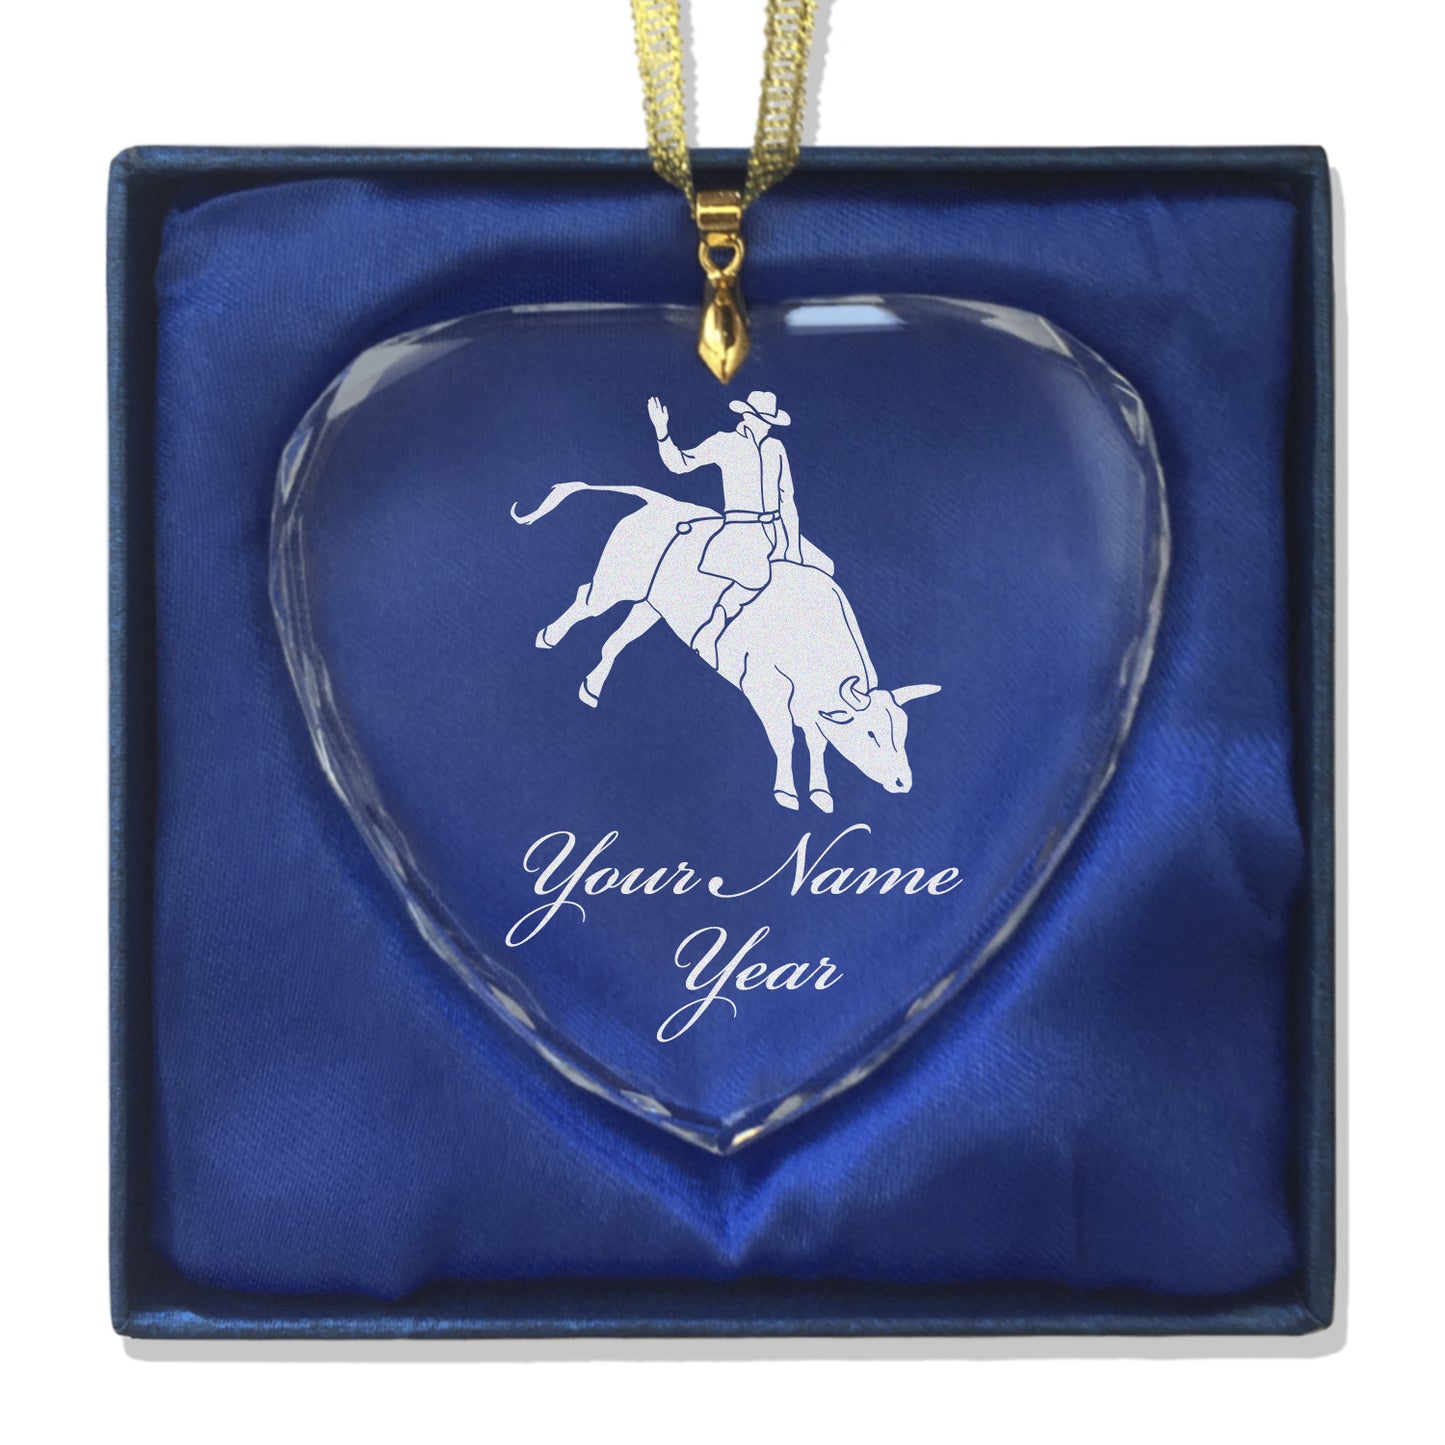 LaserGram Christmas Ornament, Bull Rider Cowboy, Personalized Engraving Included (Heart Shape)